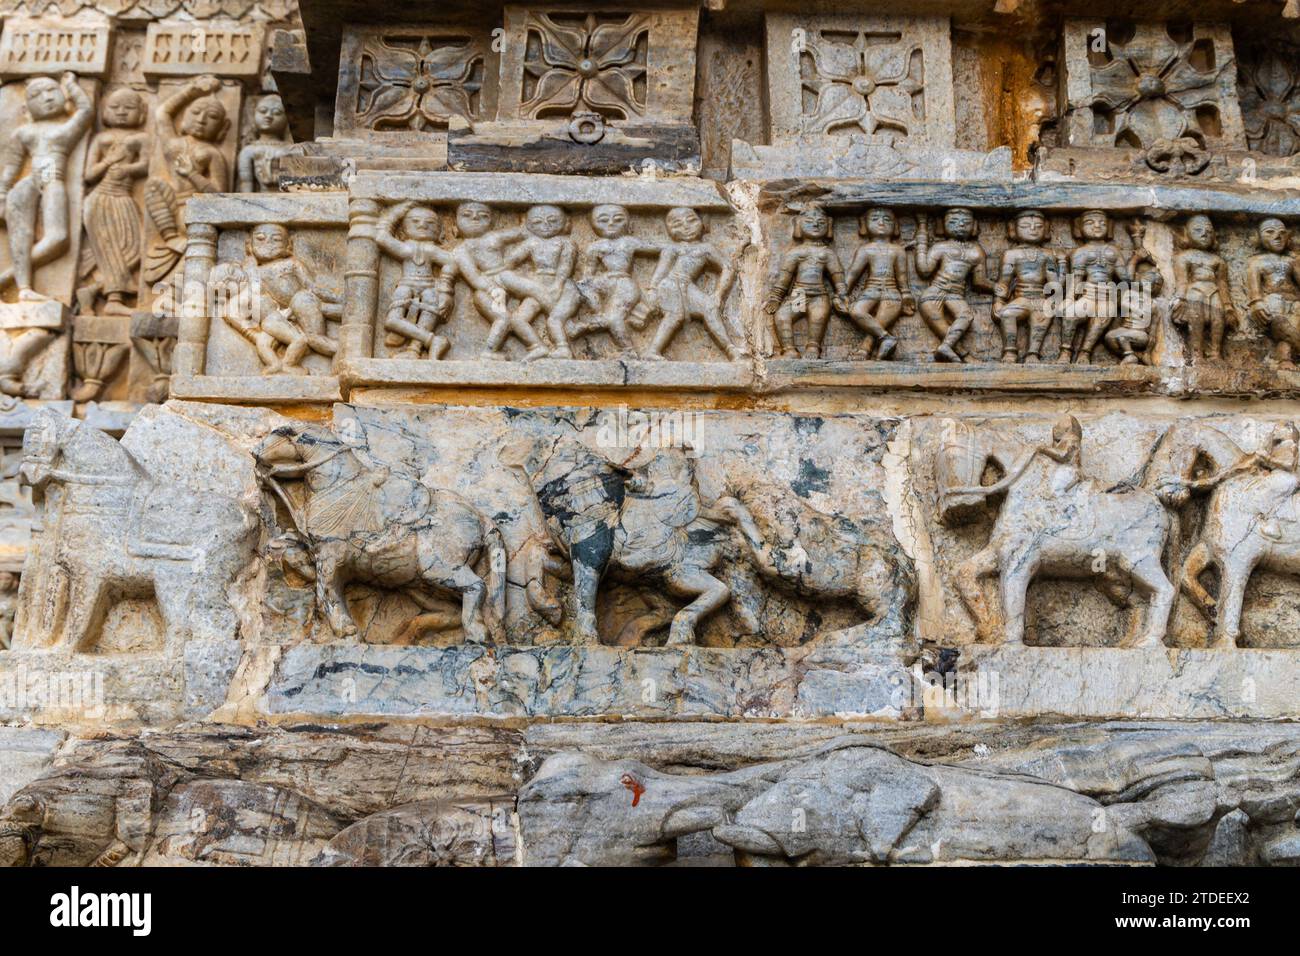 unique ancient Sculptures Elephant carvings on hindu holy temple wall at day image is taken at Jagdish Temple udaipur rajasthan india. Stock Photo